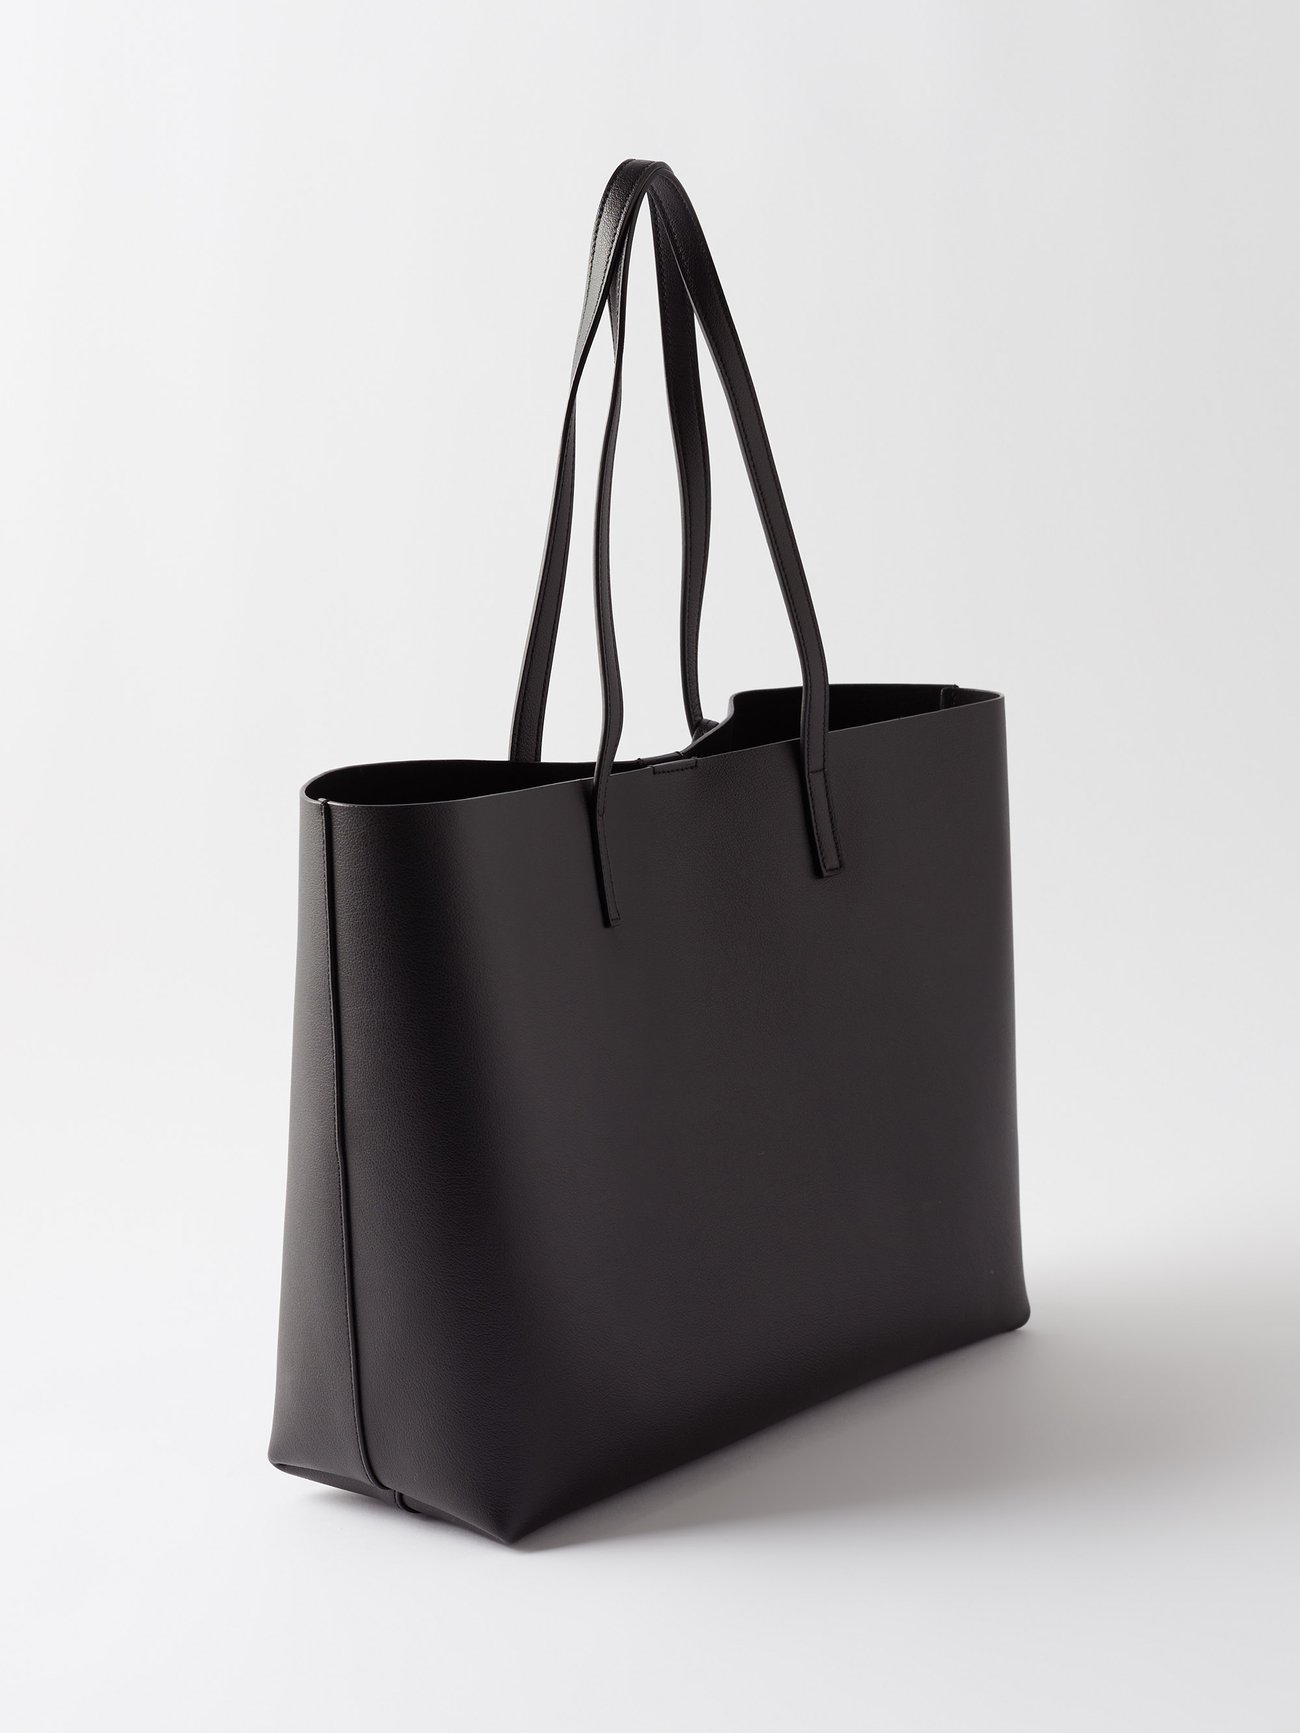 YVES Saint Laurent Black Leather East/West Shopping Tote Bag-US